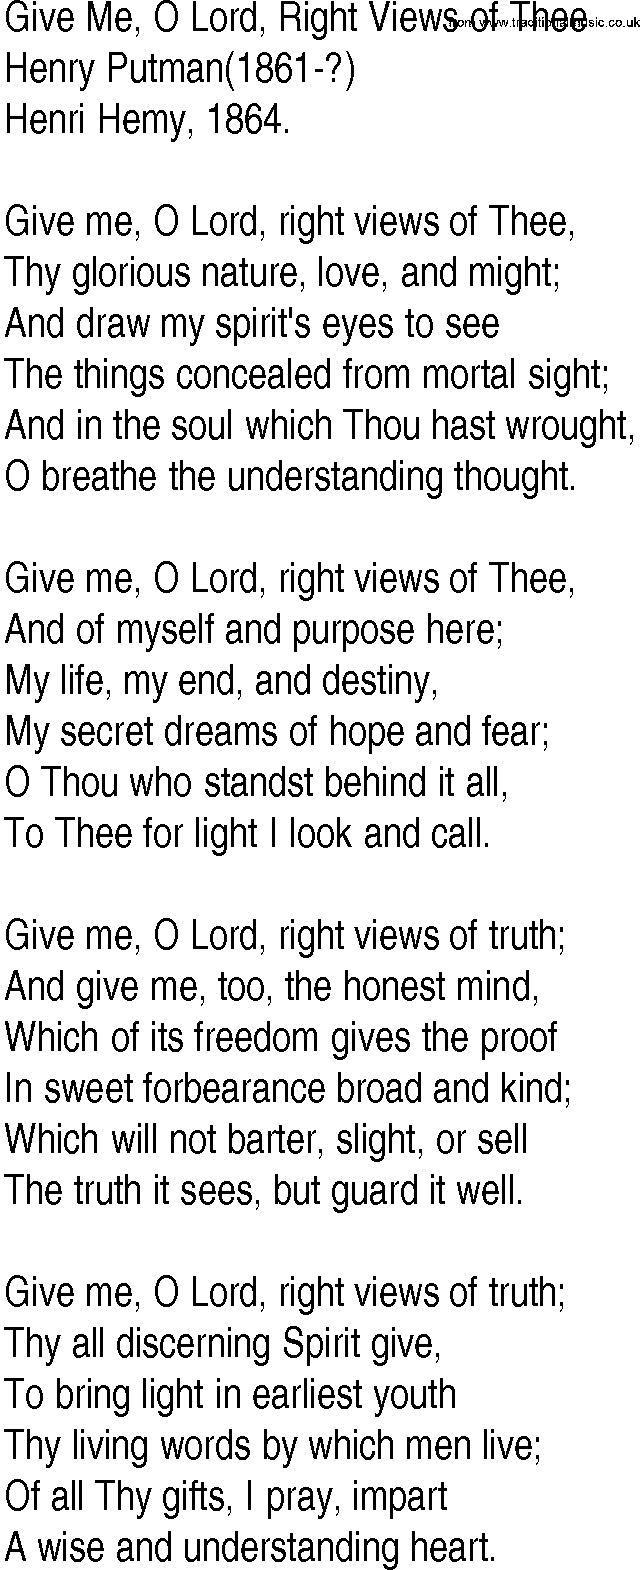 Hymn and Gospel Song: Give Me, O Lord, Right Views of Thee by Henry Putman lyrics